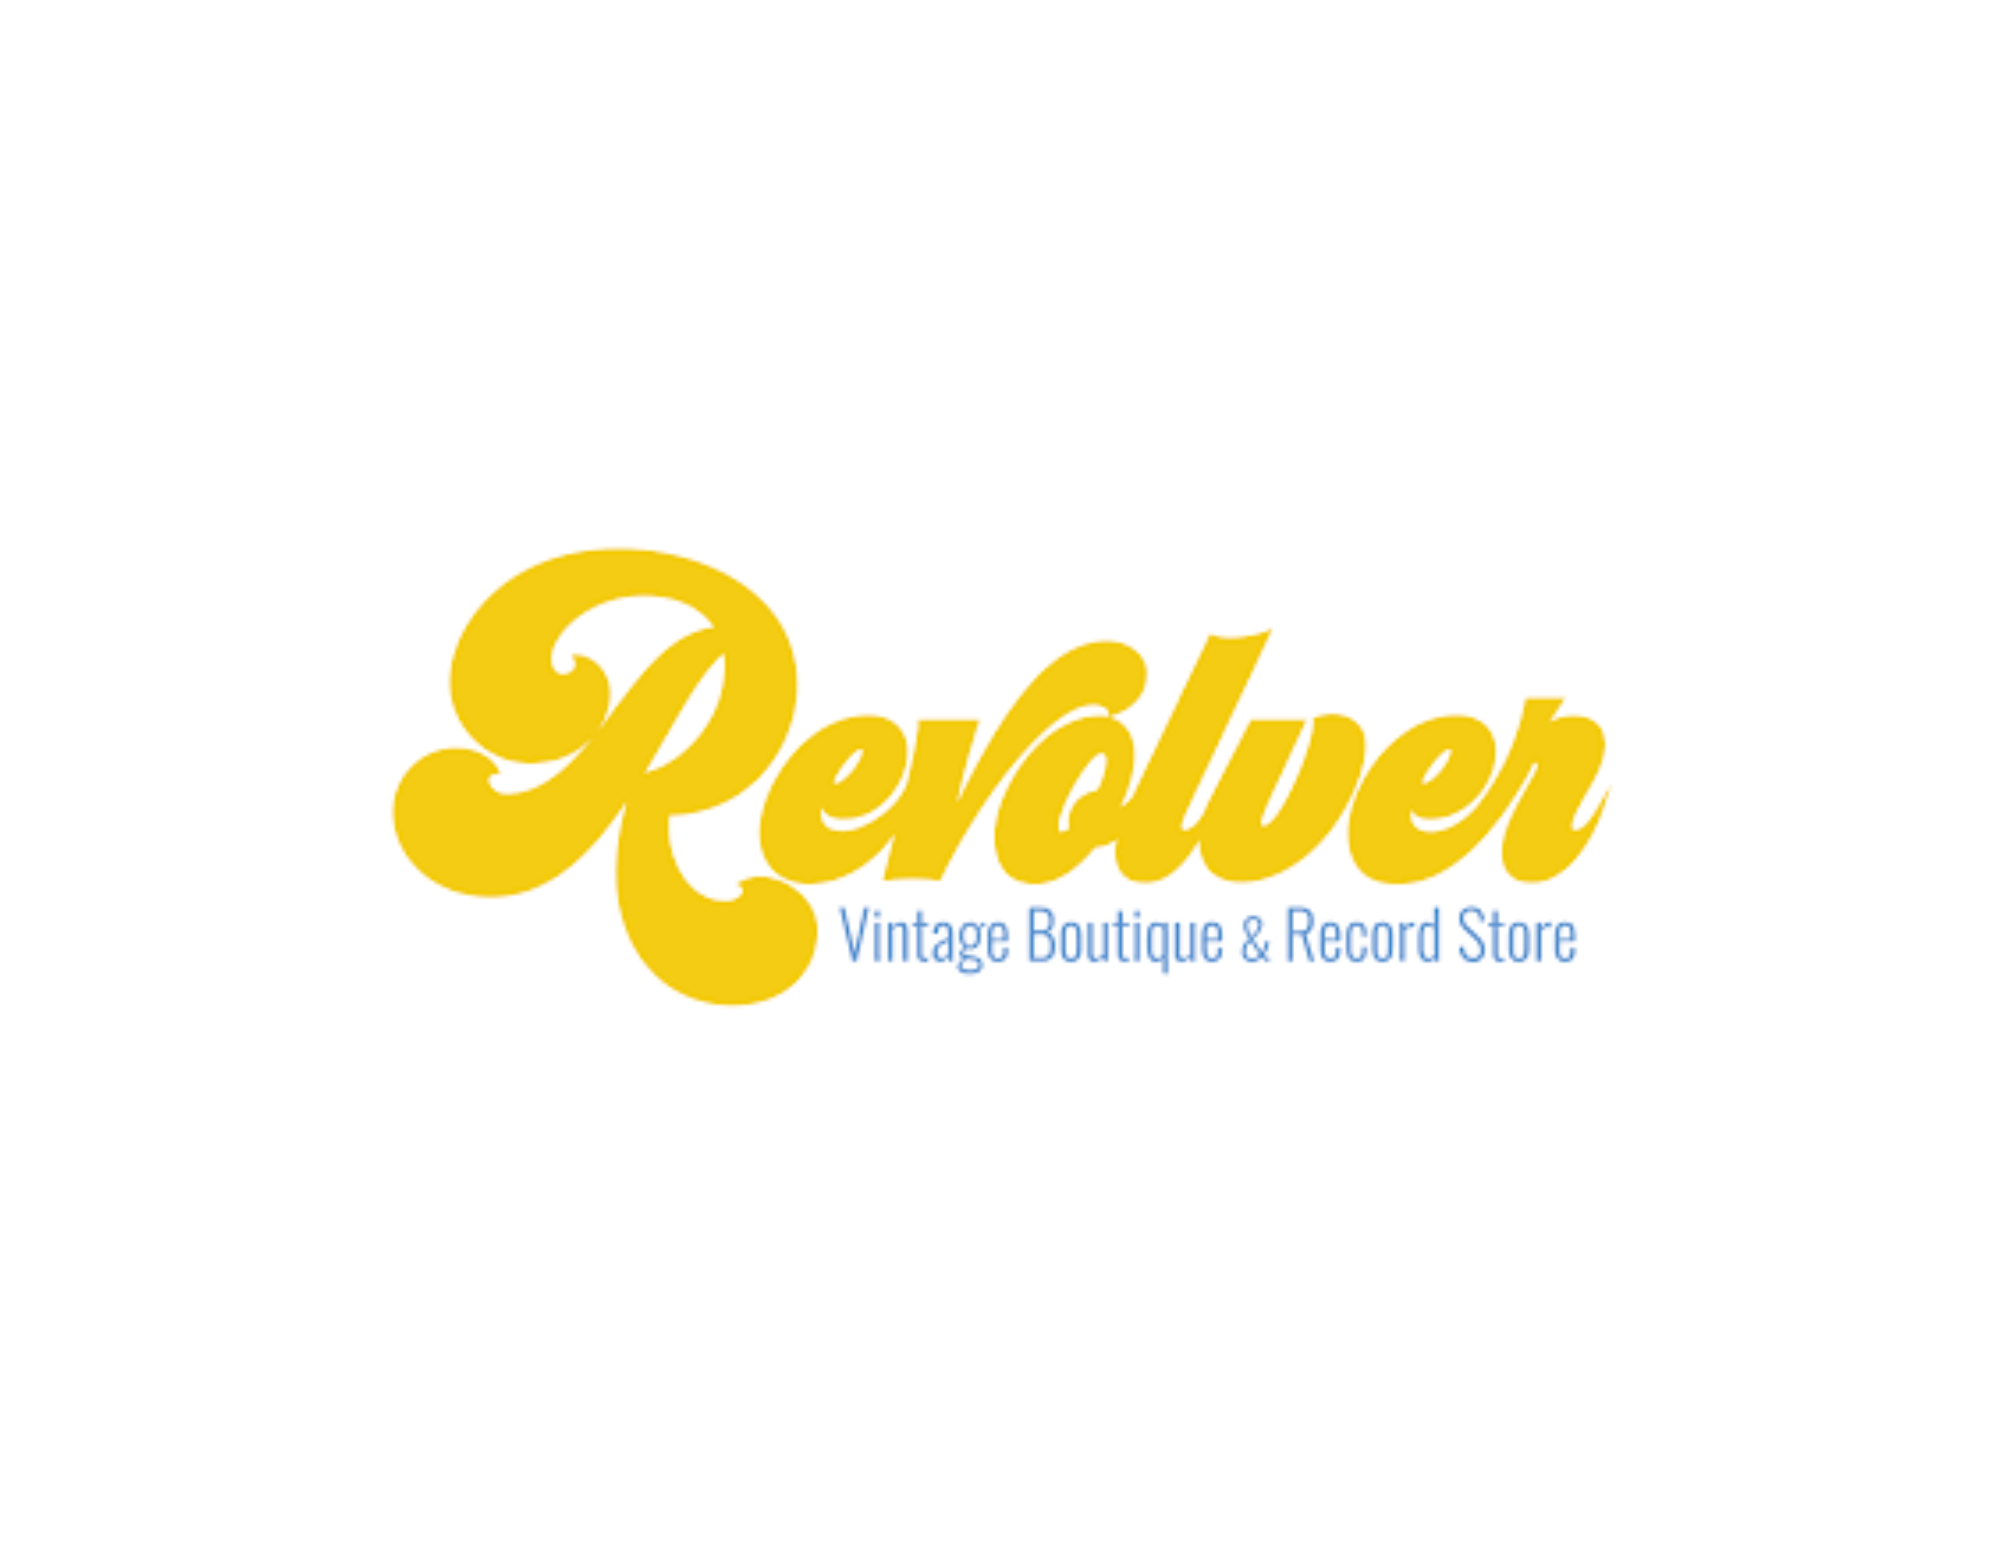 Revolver Vintage Boutique and Record Store